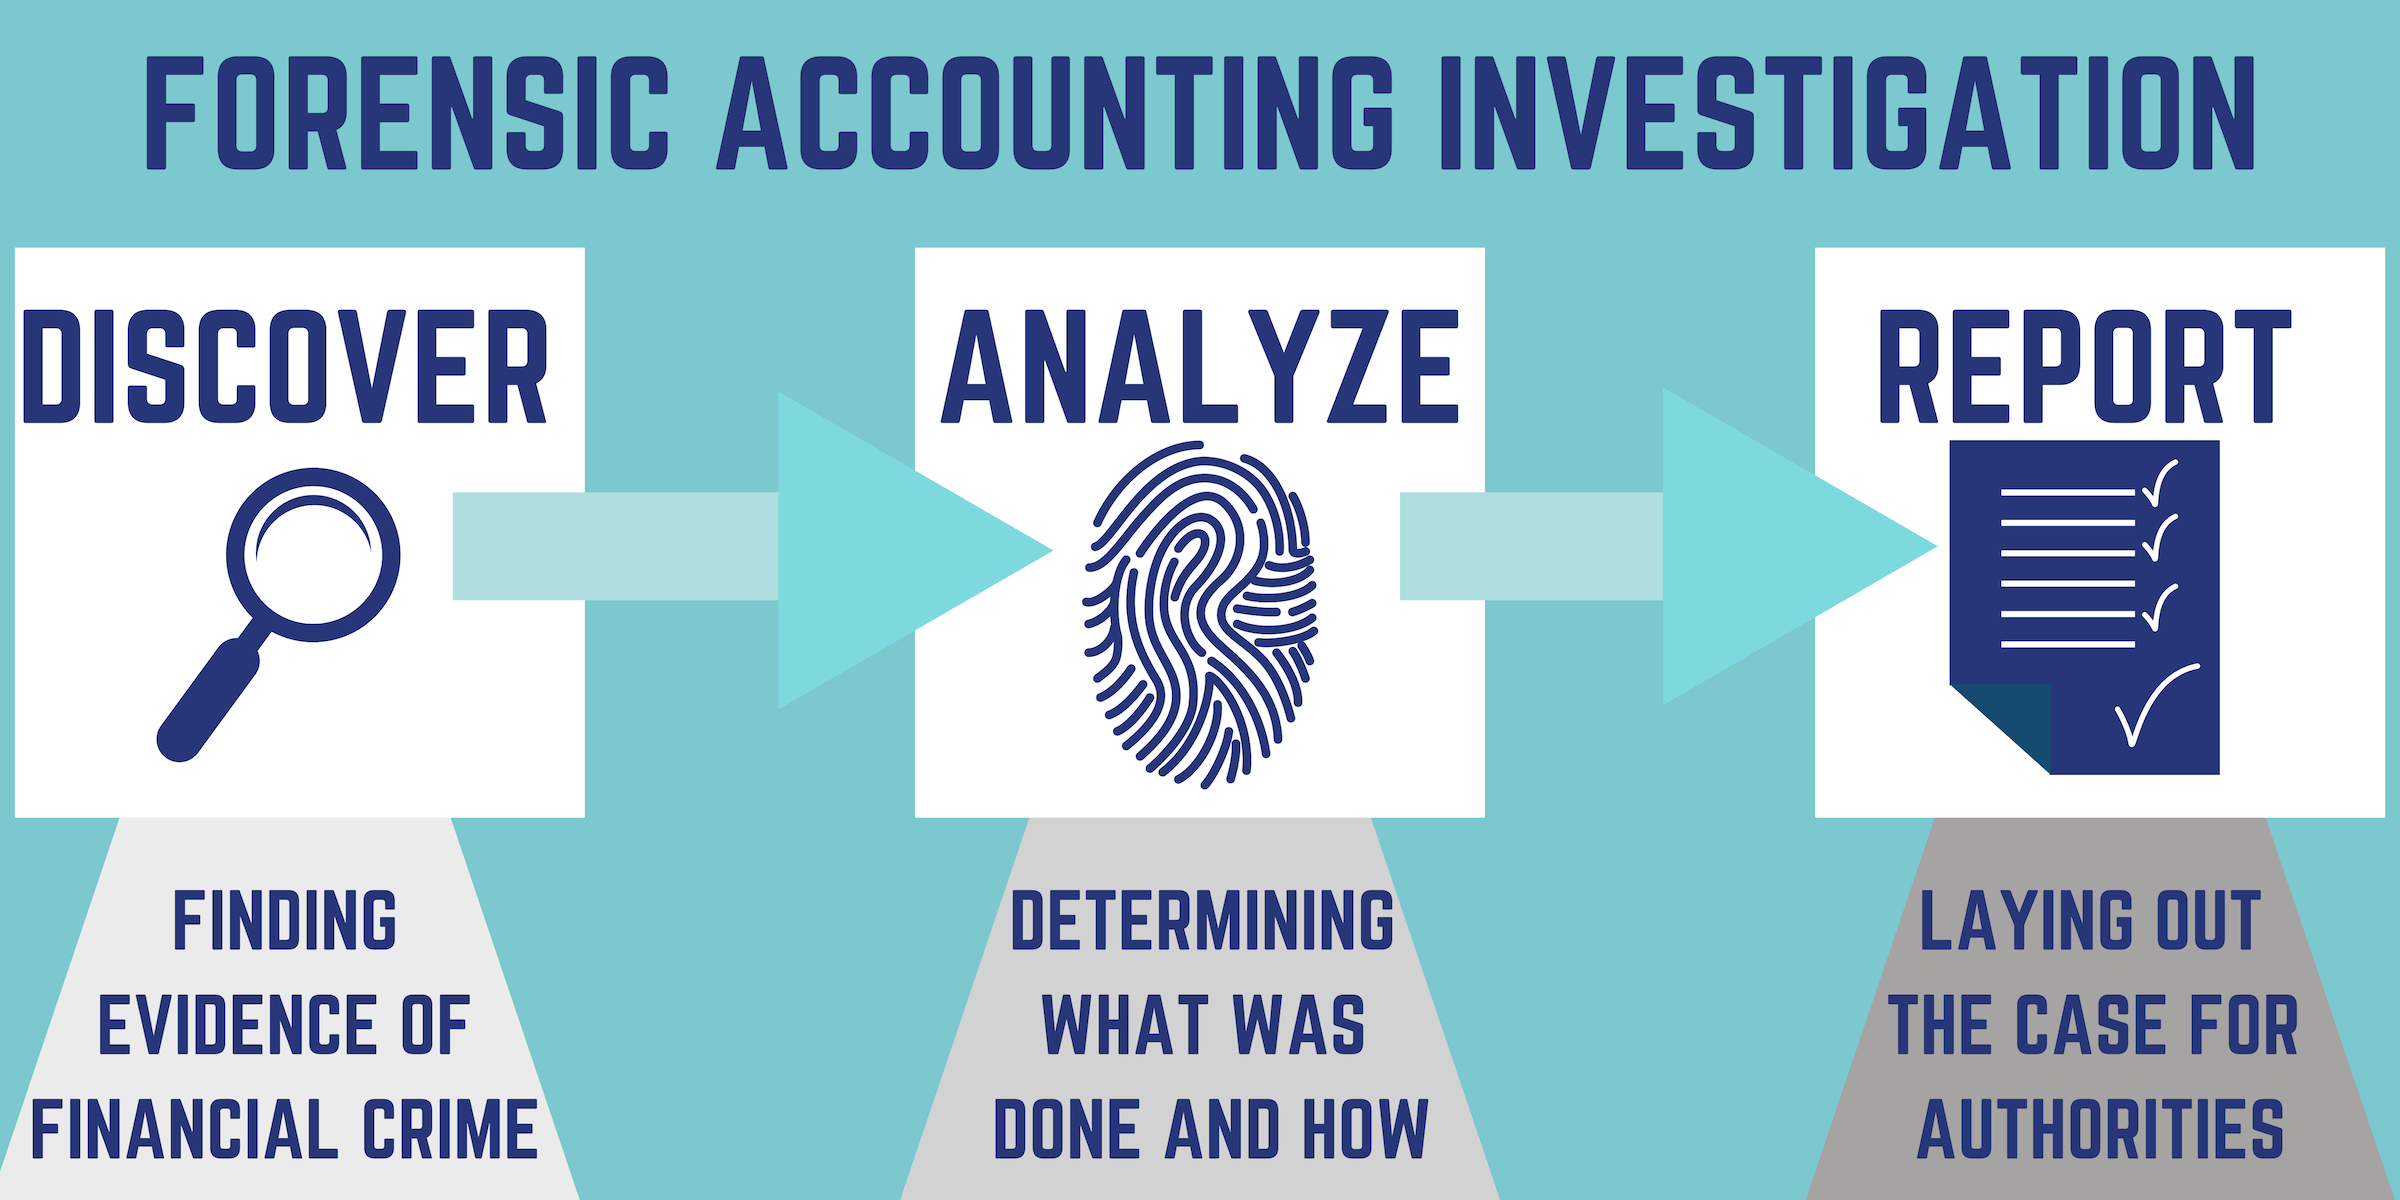 What Can I Do With a Forensic Accounting MBA? - MBA Central